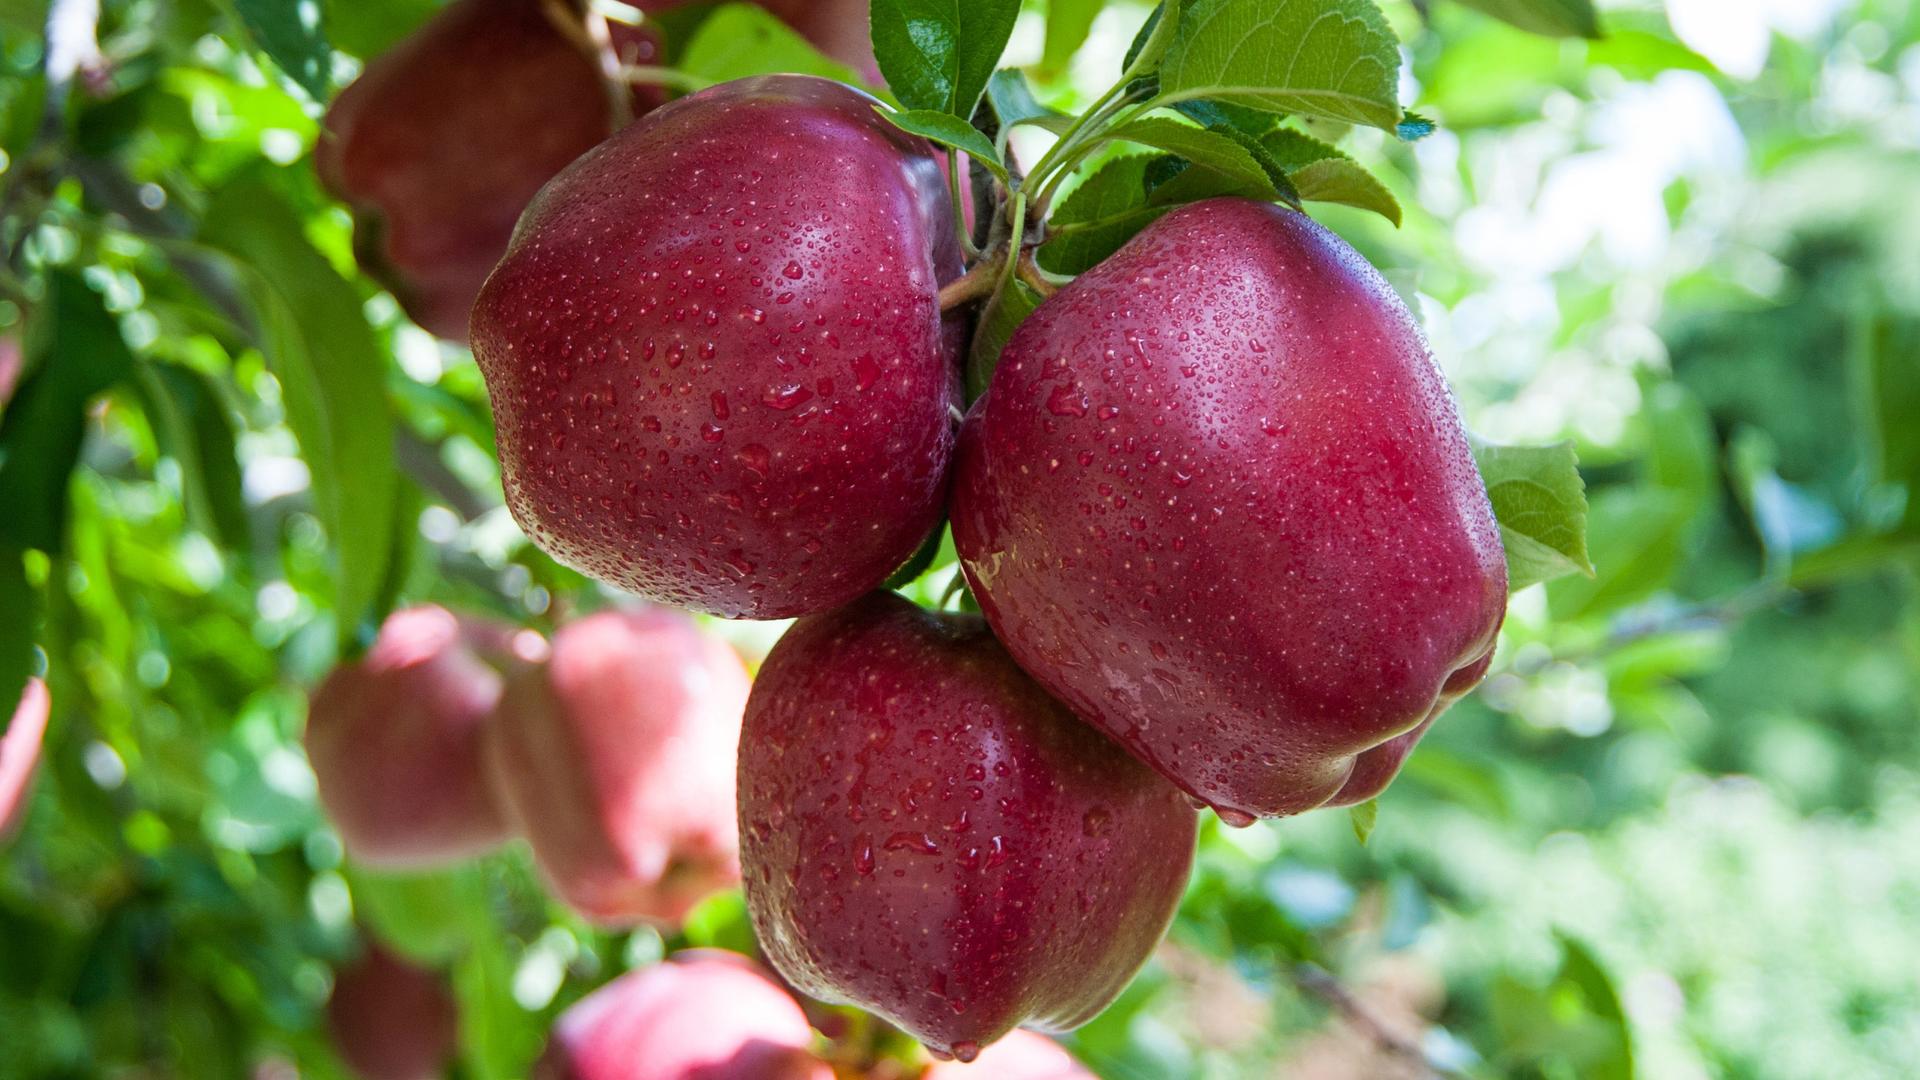 The Red Delicious was first discovered on an Iowa farm in the 1870’s. It grew to become America’s most popular apple. 